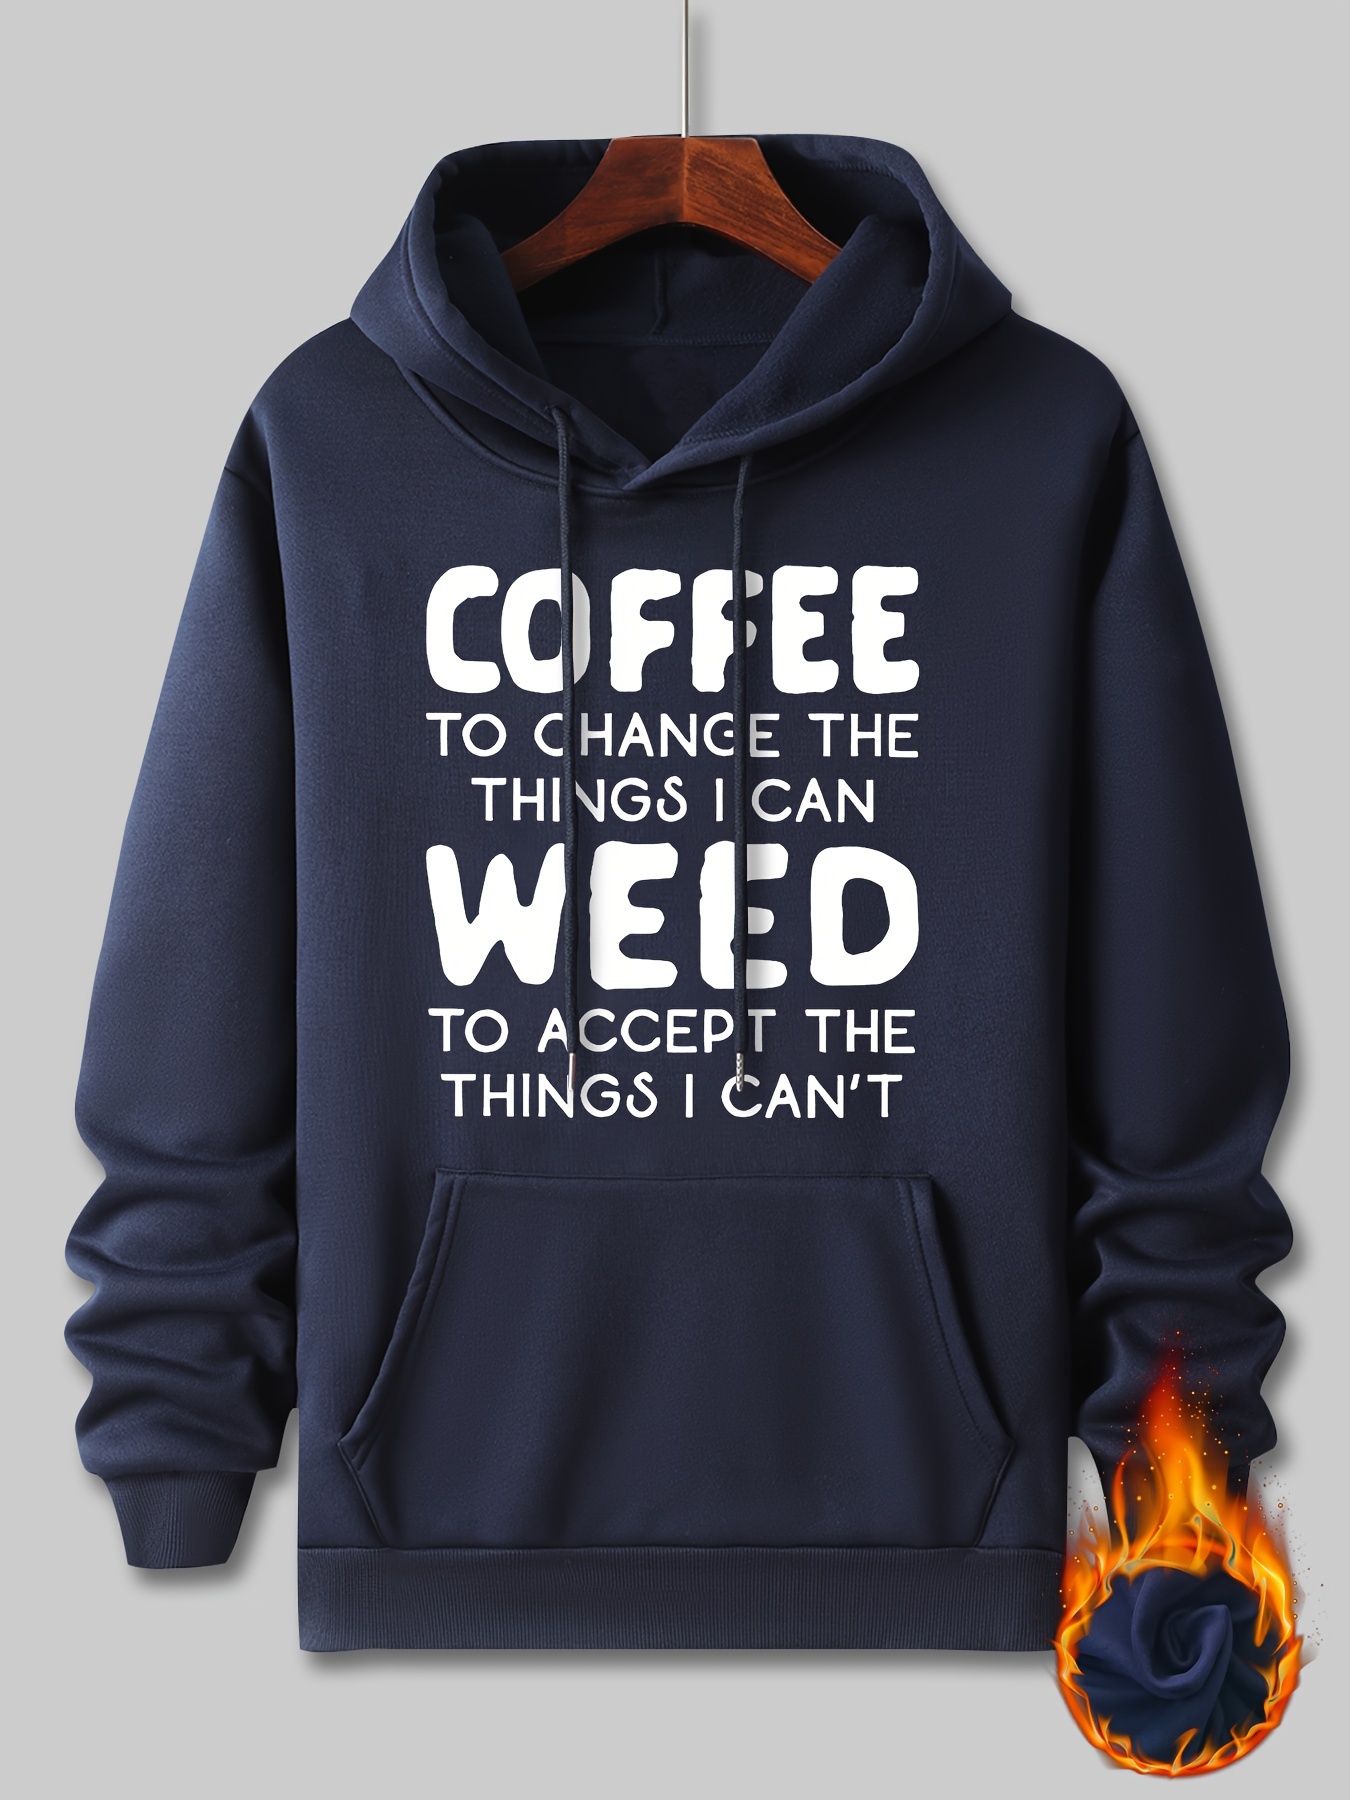 coffee and weed pattern print hooded sweatshirt personalized hoodies fashion casual tops for spring autumn mens clothing details 5